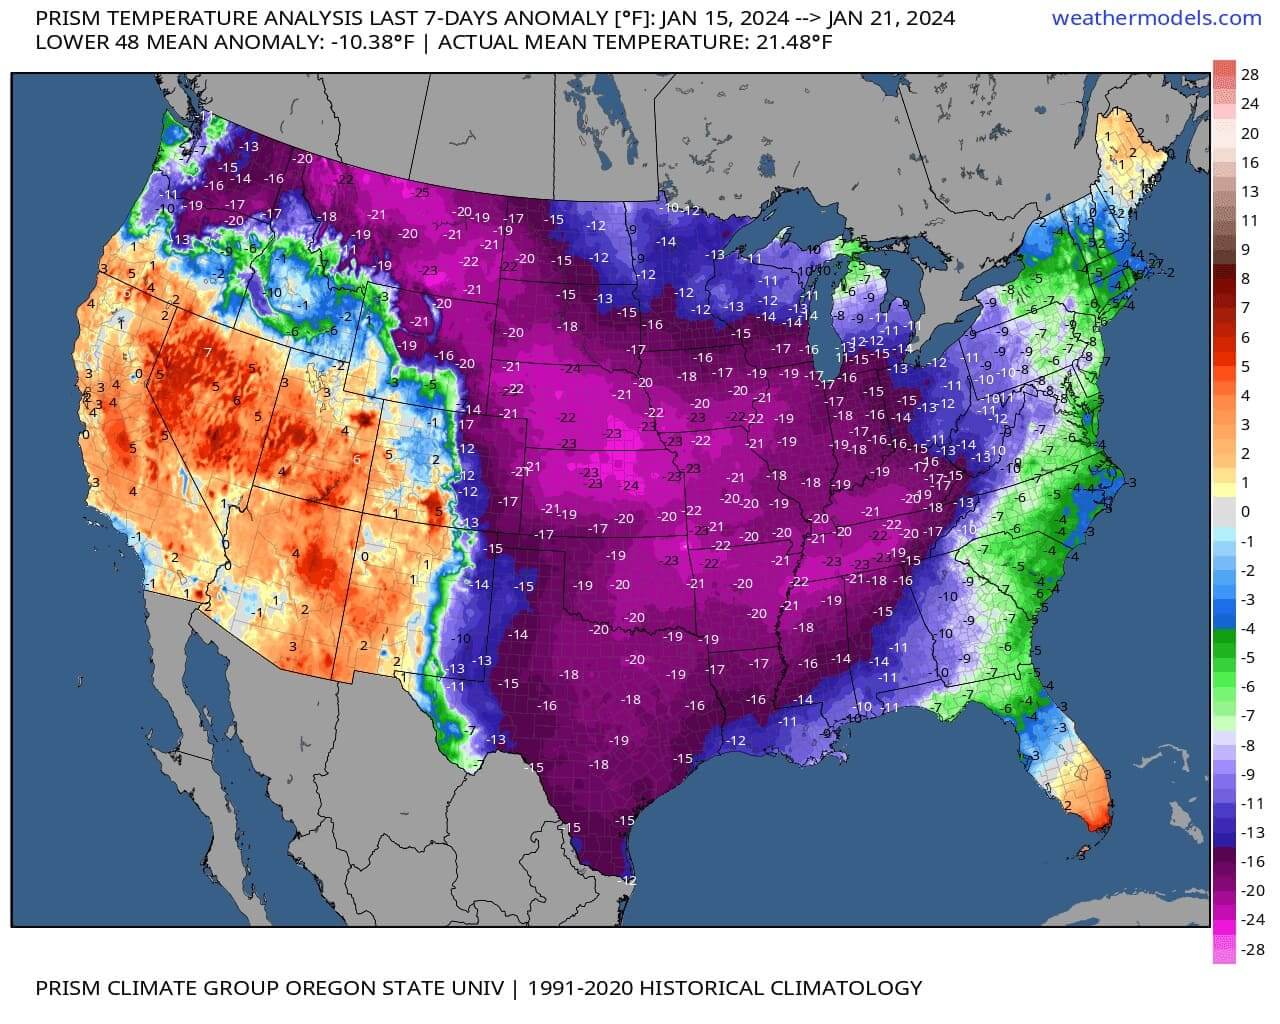 weather-pattern-shift-temperature-analysis-united-states-last-7-days-cold